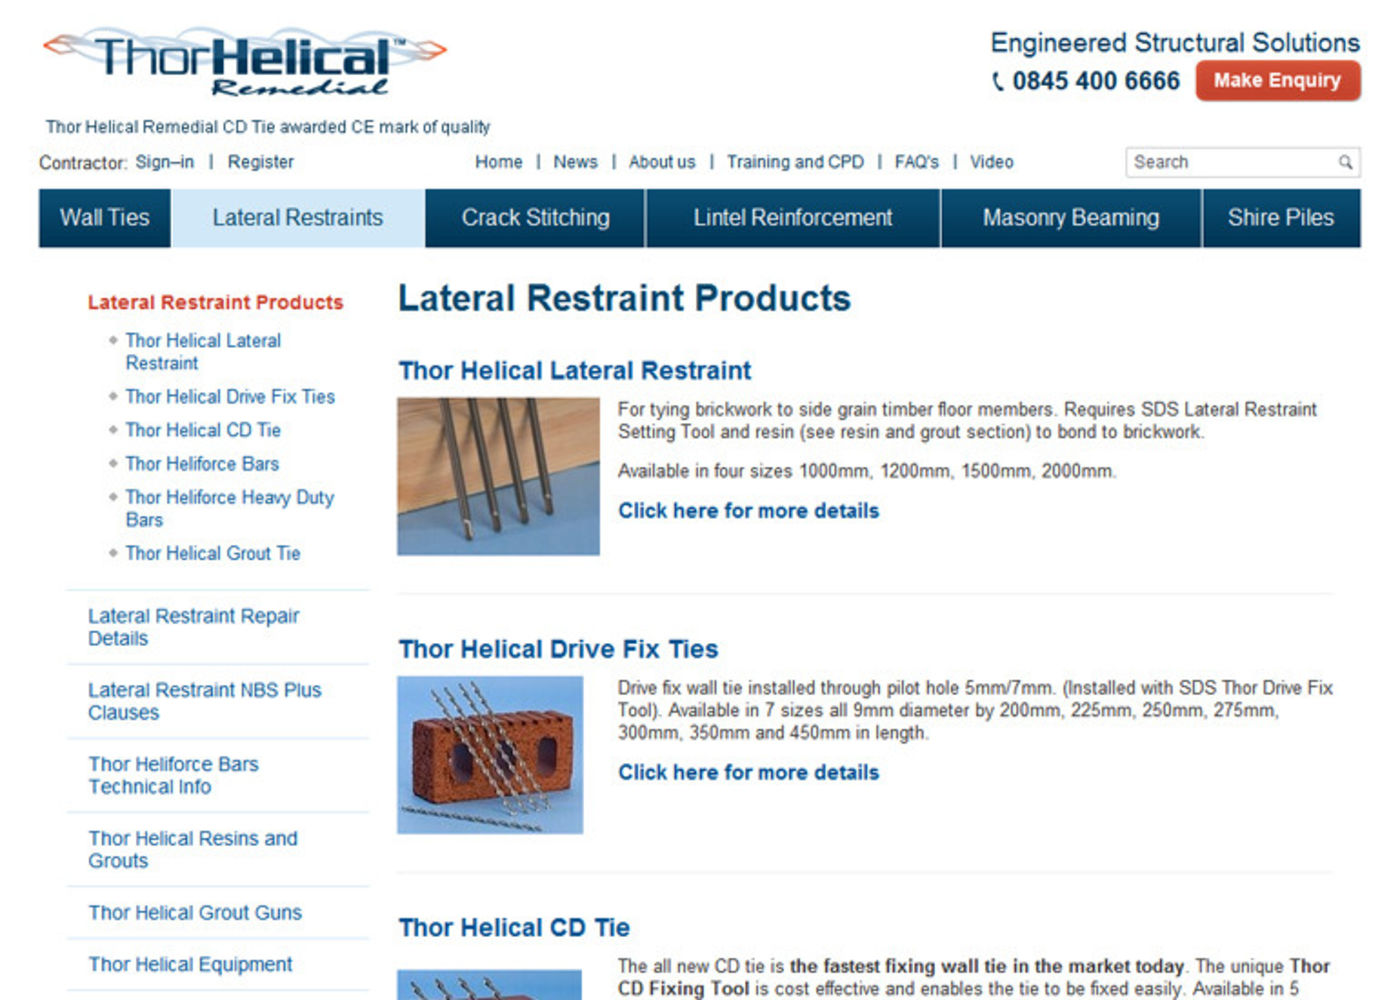 Thor Helical Remedial Products